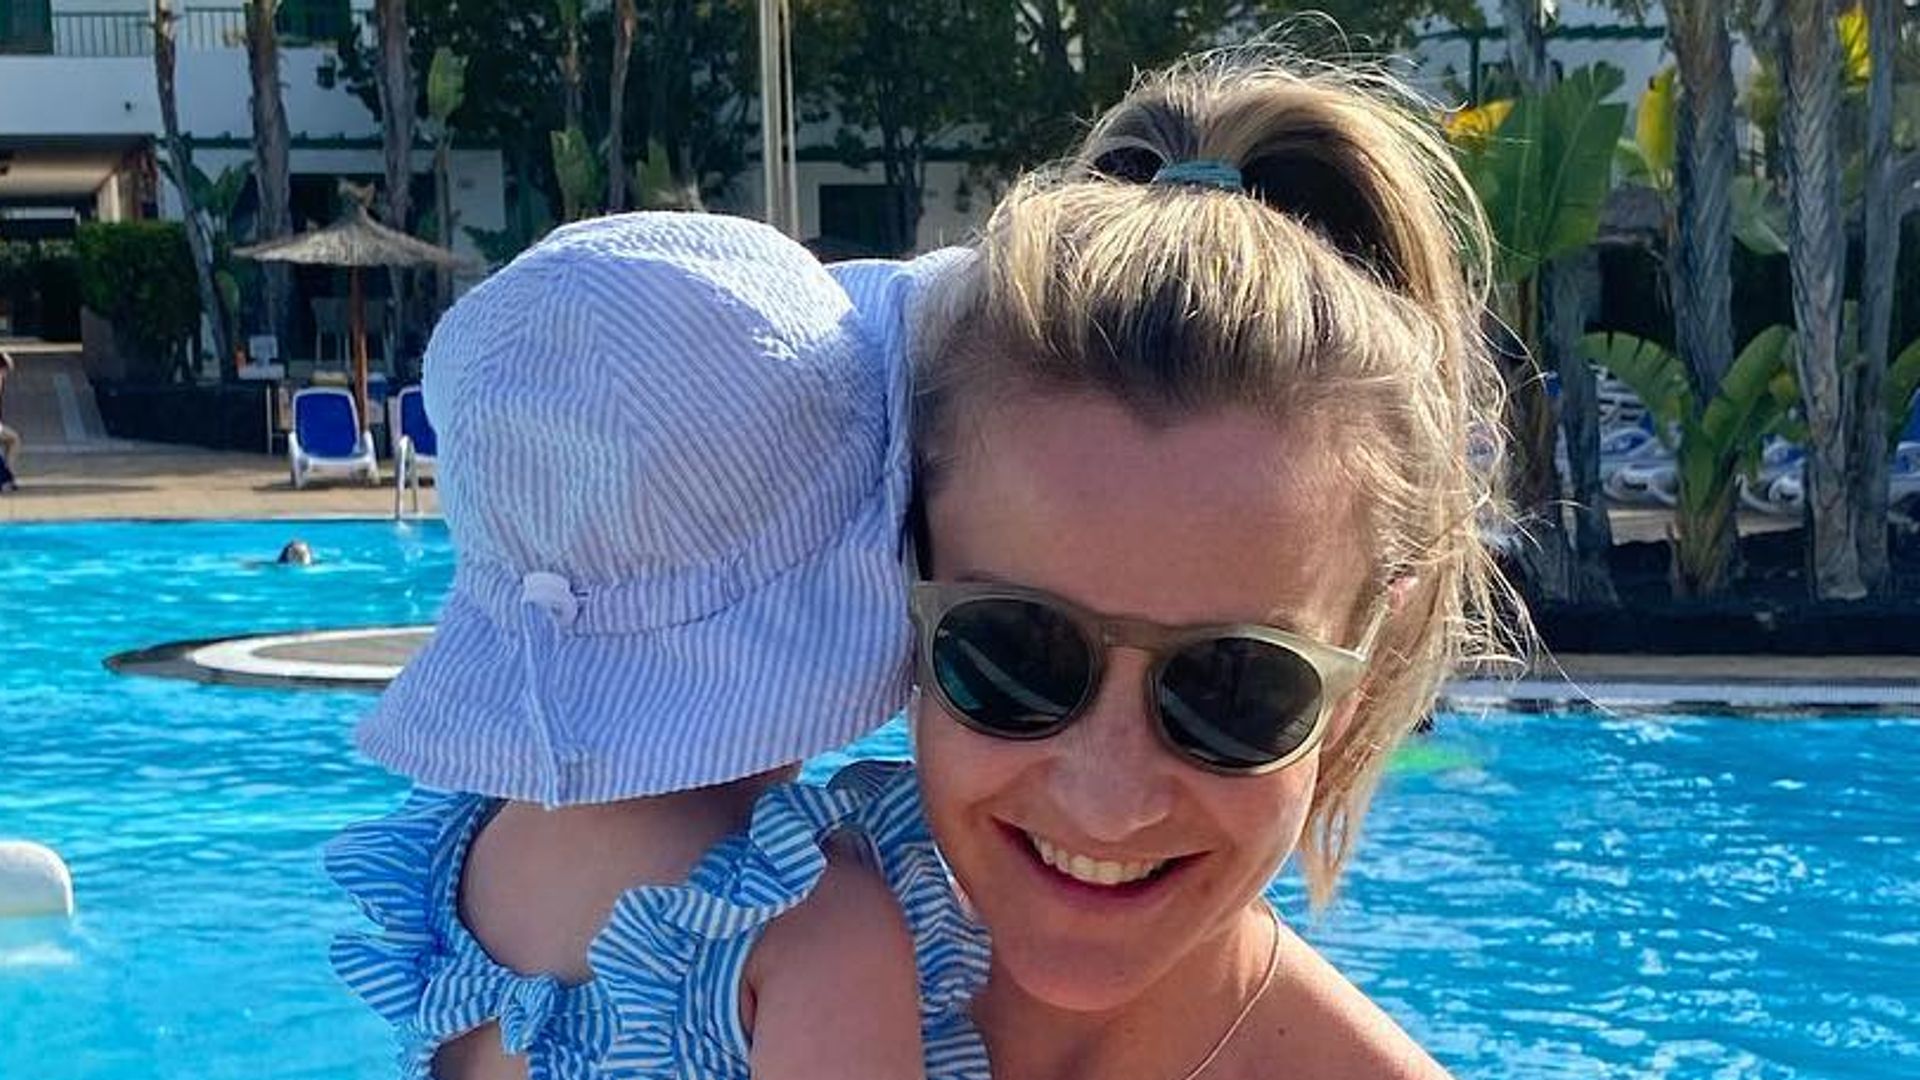 mother holding baby at pool 